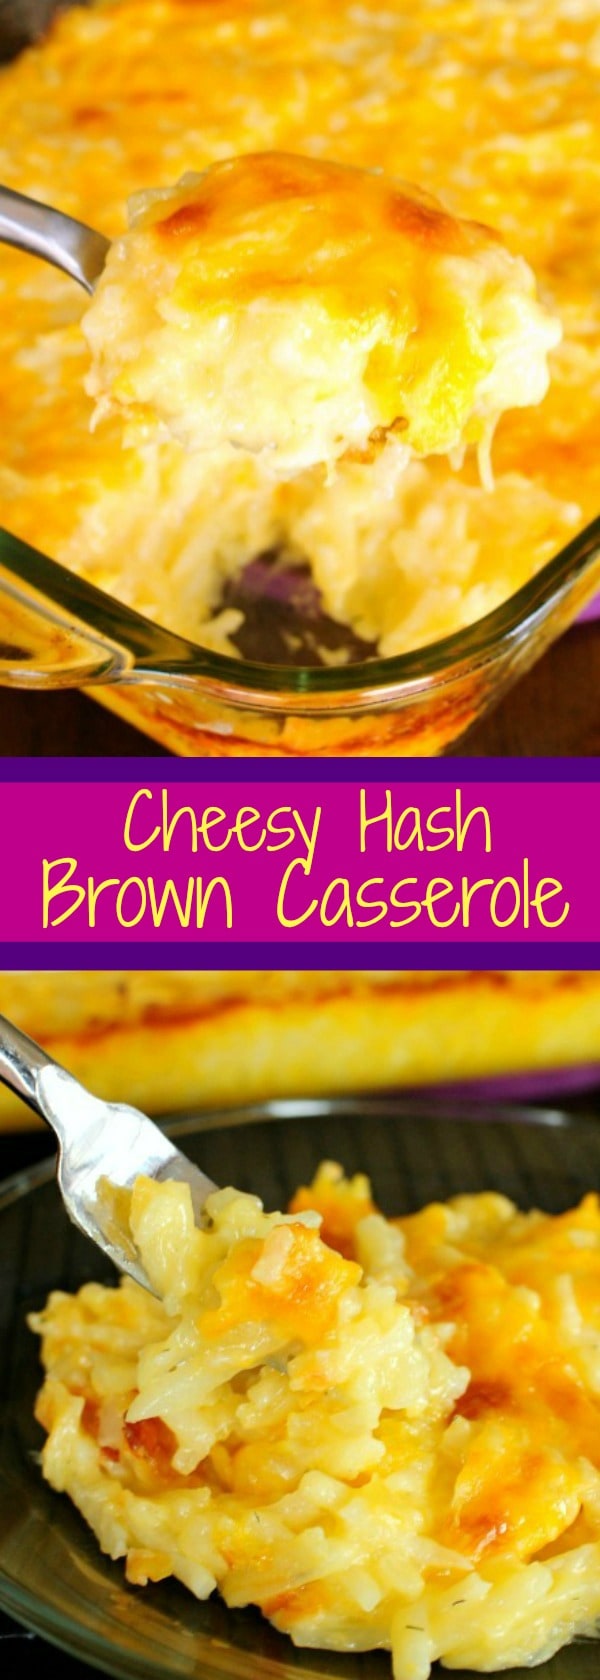 Cheesy Hash Brown Casserole - Back for Seconds